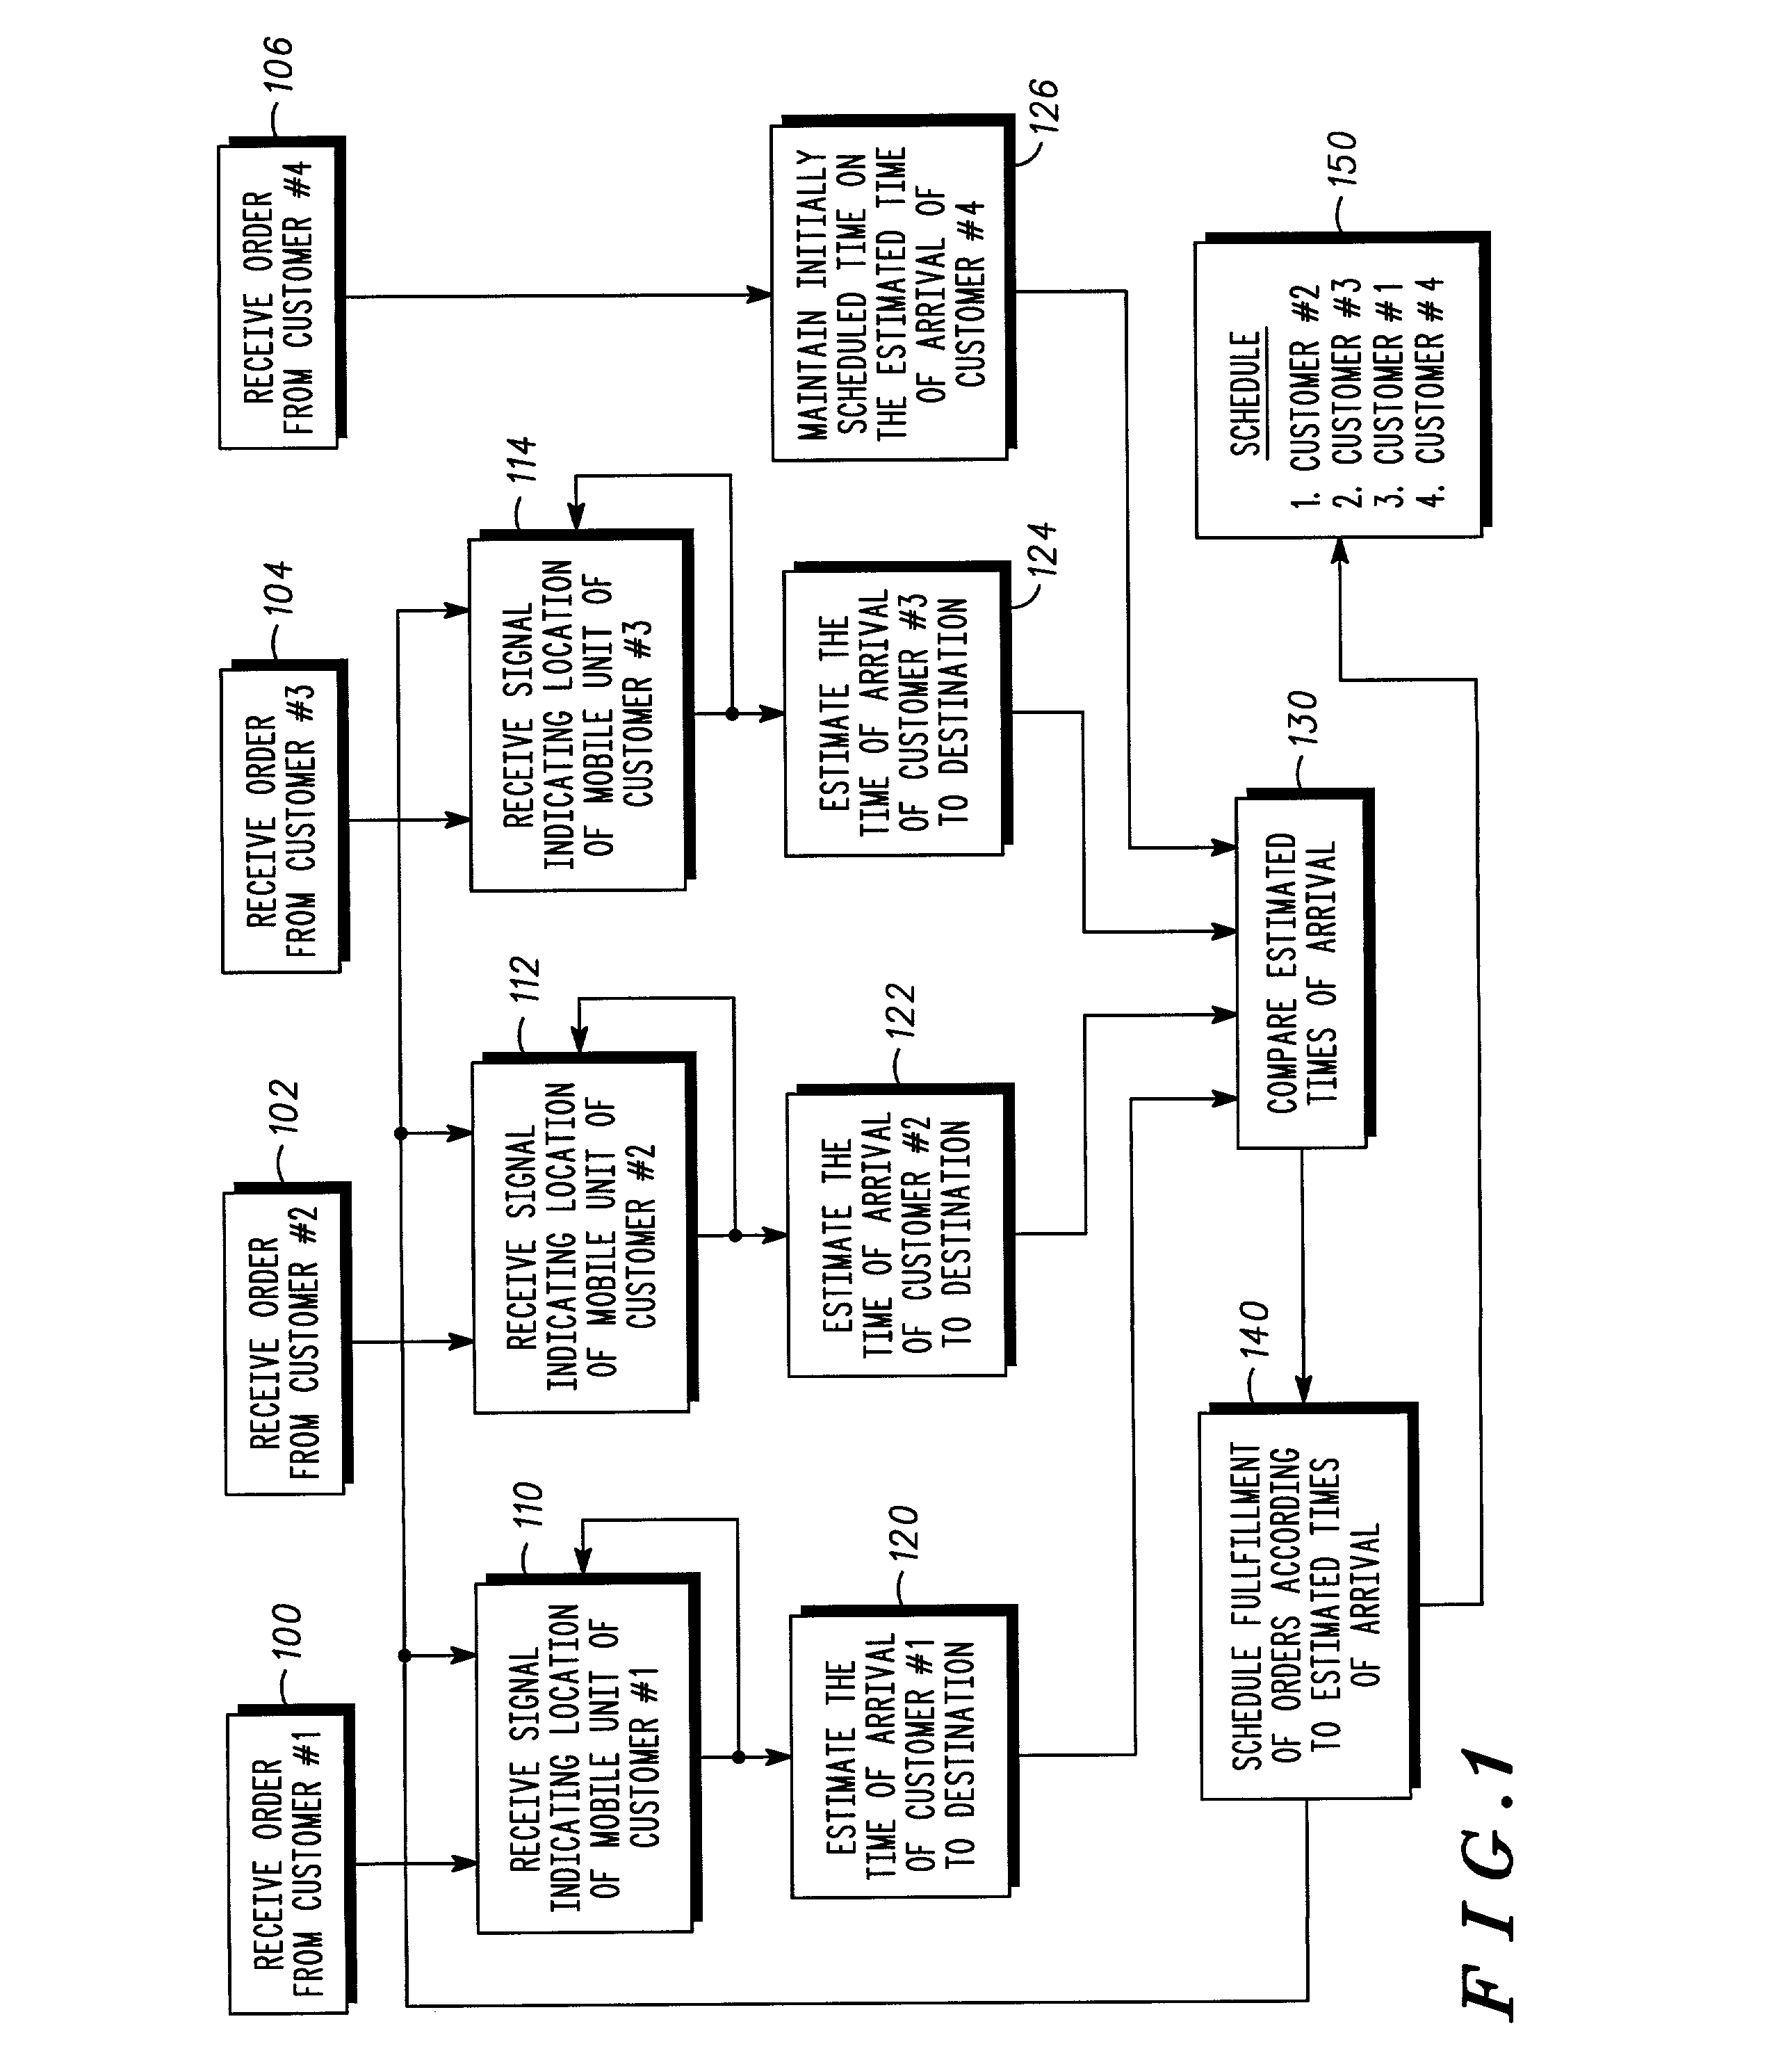 Method and apparatus for notifying a party of another party's location and estimated time of arrival at a predetermined destination